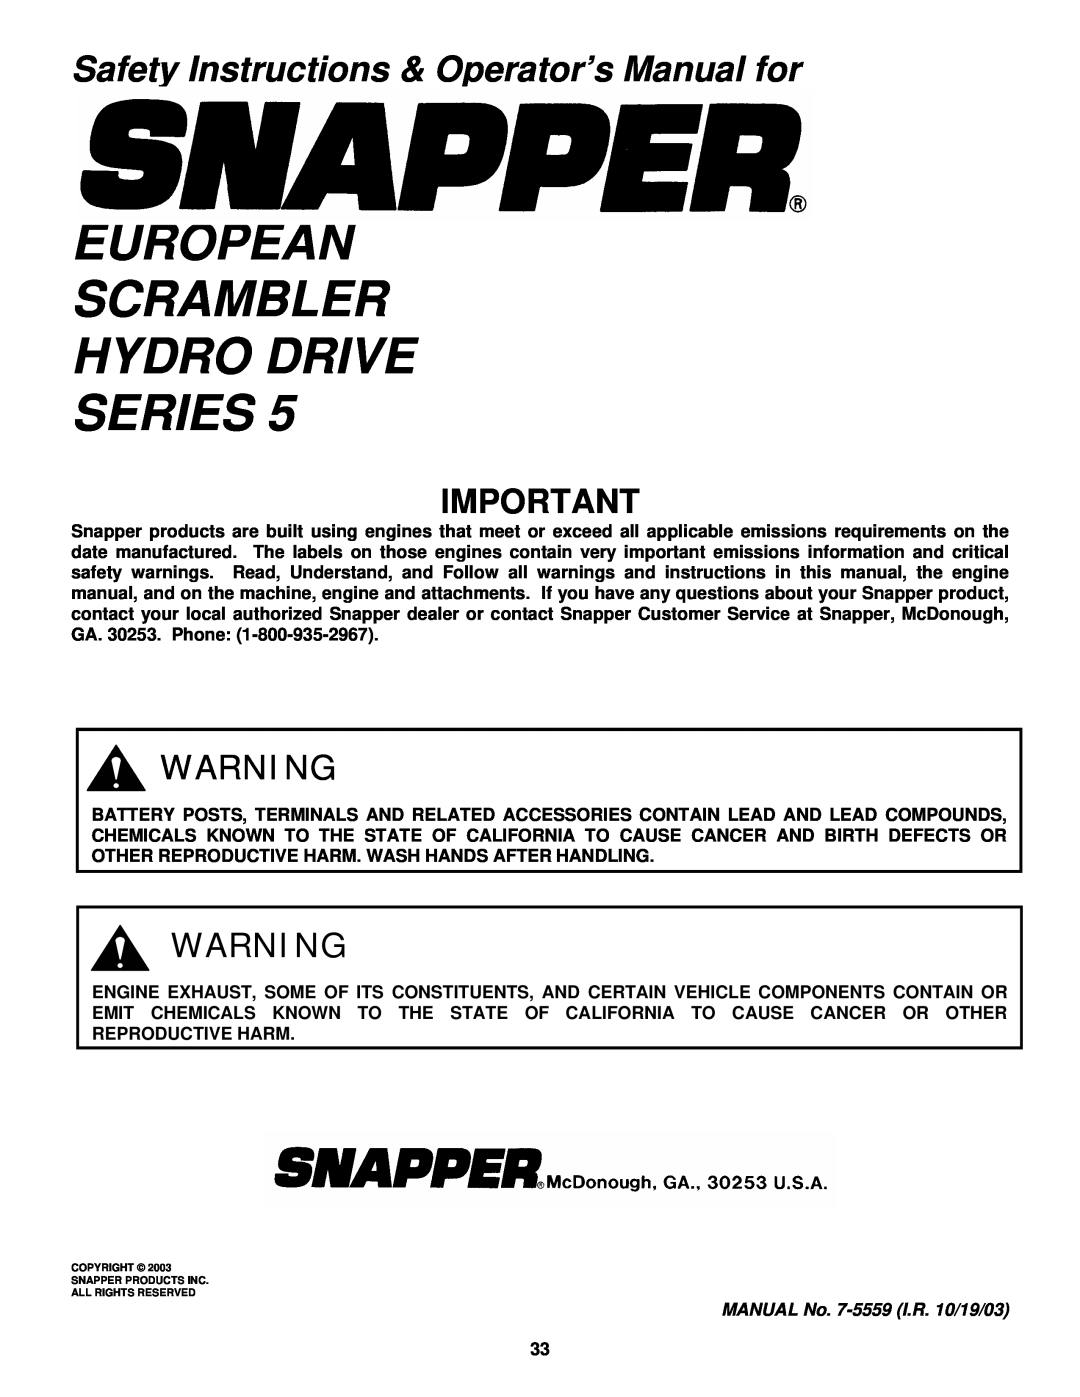 Snapper EYZ16335BVE European Scrambler Hydro Drive Series, Safety Instructions & Operator’s Manual for 